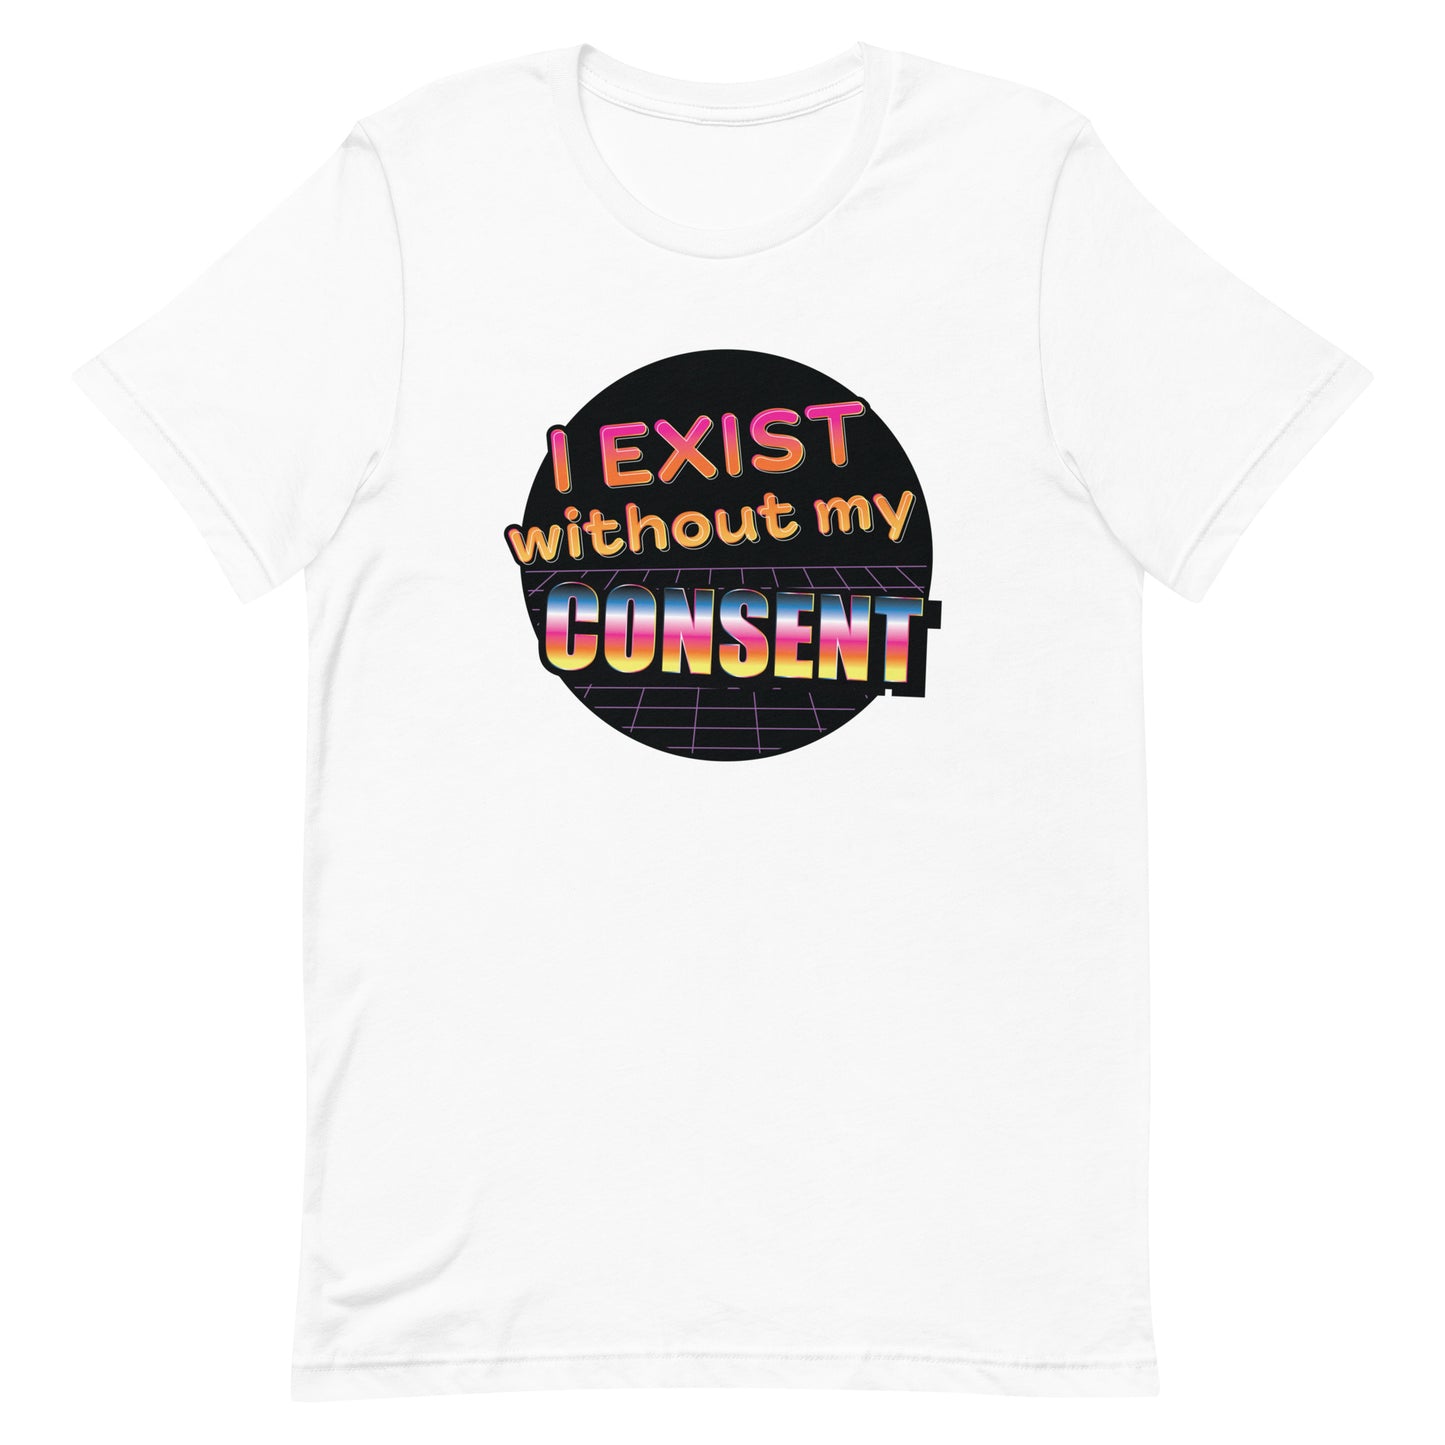 A white crewneck t-shirt featuring an 80's style graphic with brightly colored text that reads "I exist without my consent"